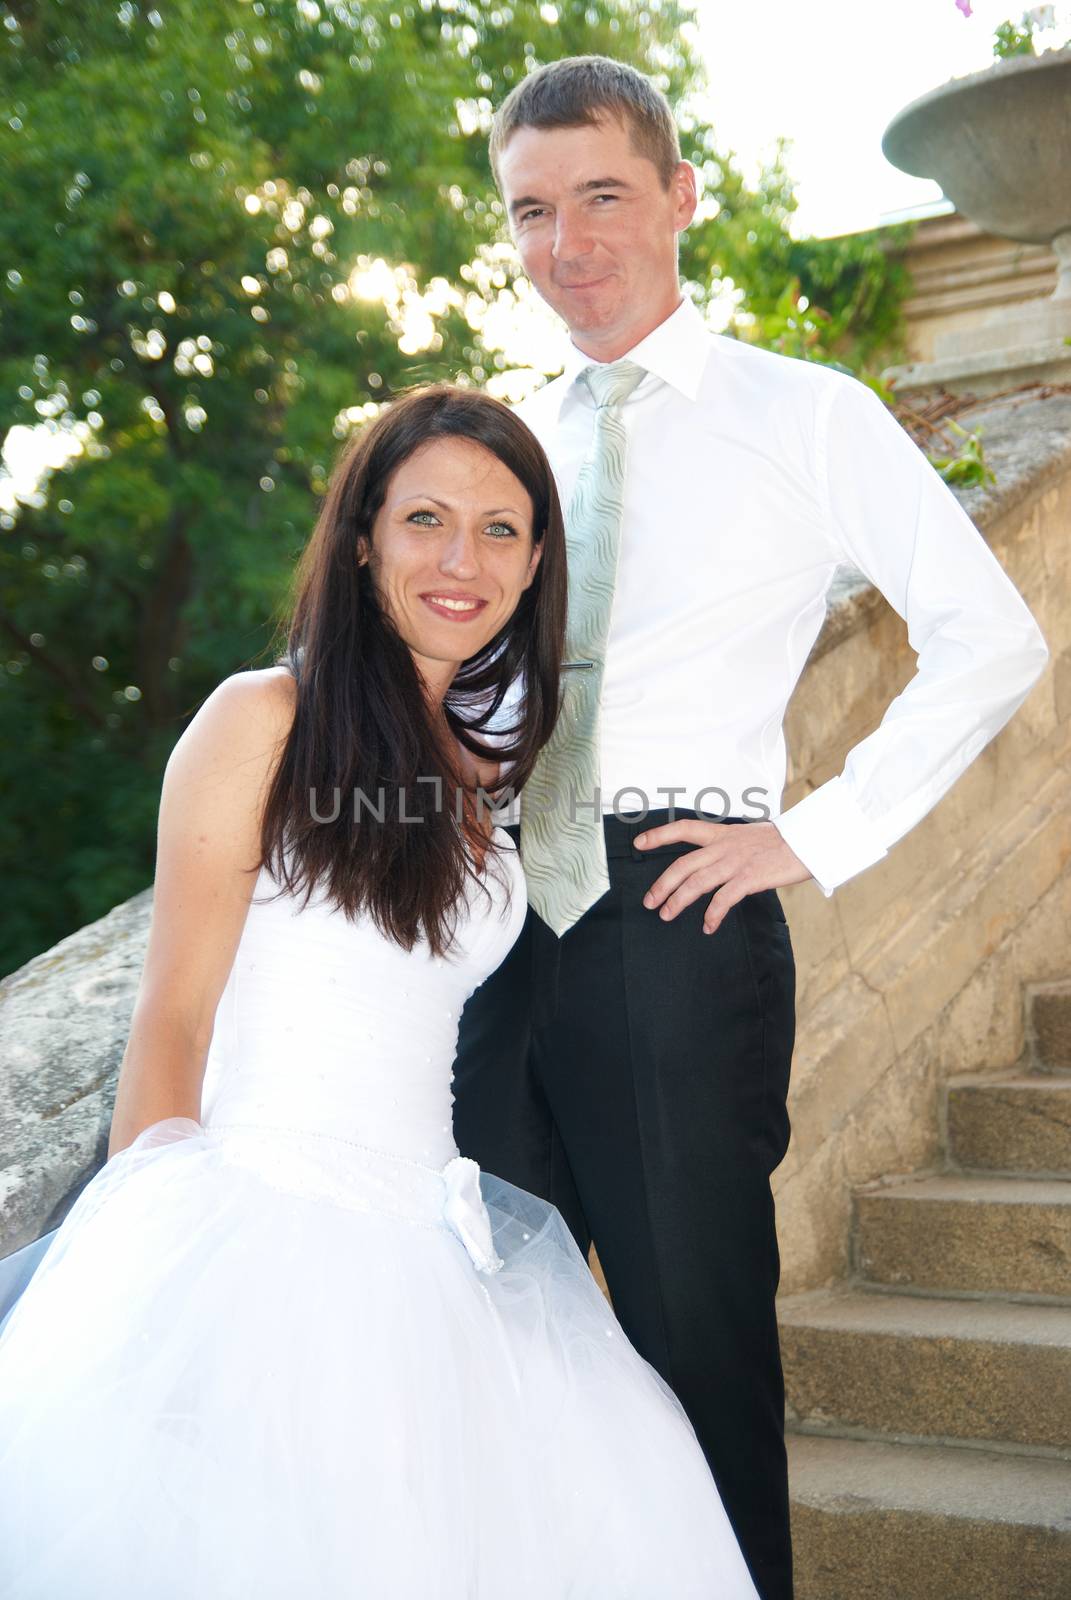 Beautiful wedding couple- bride and groom. Just married